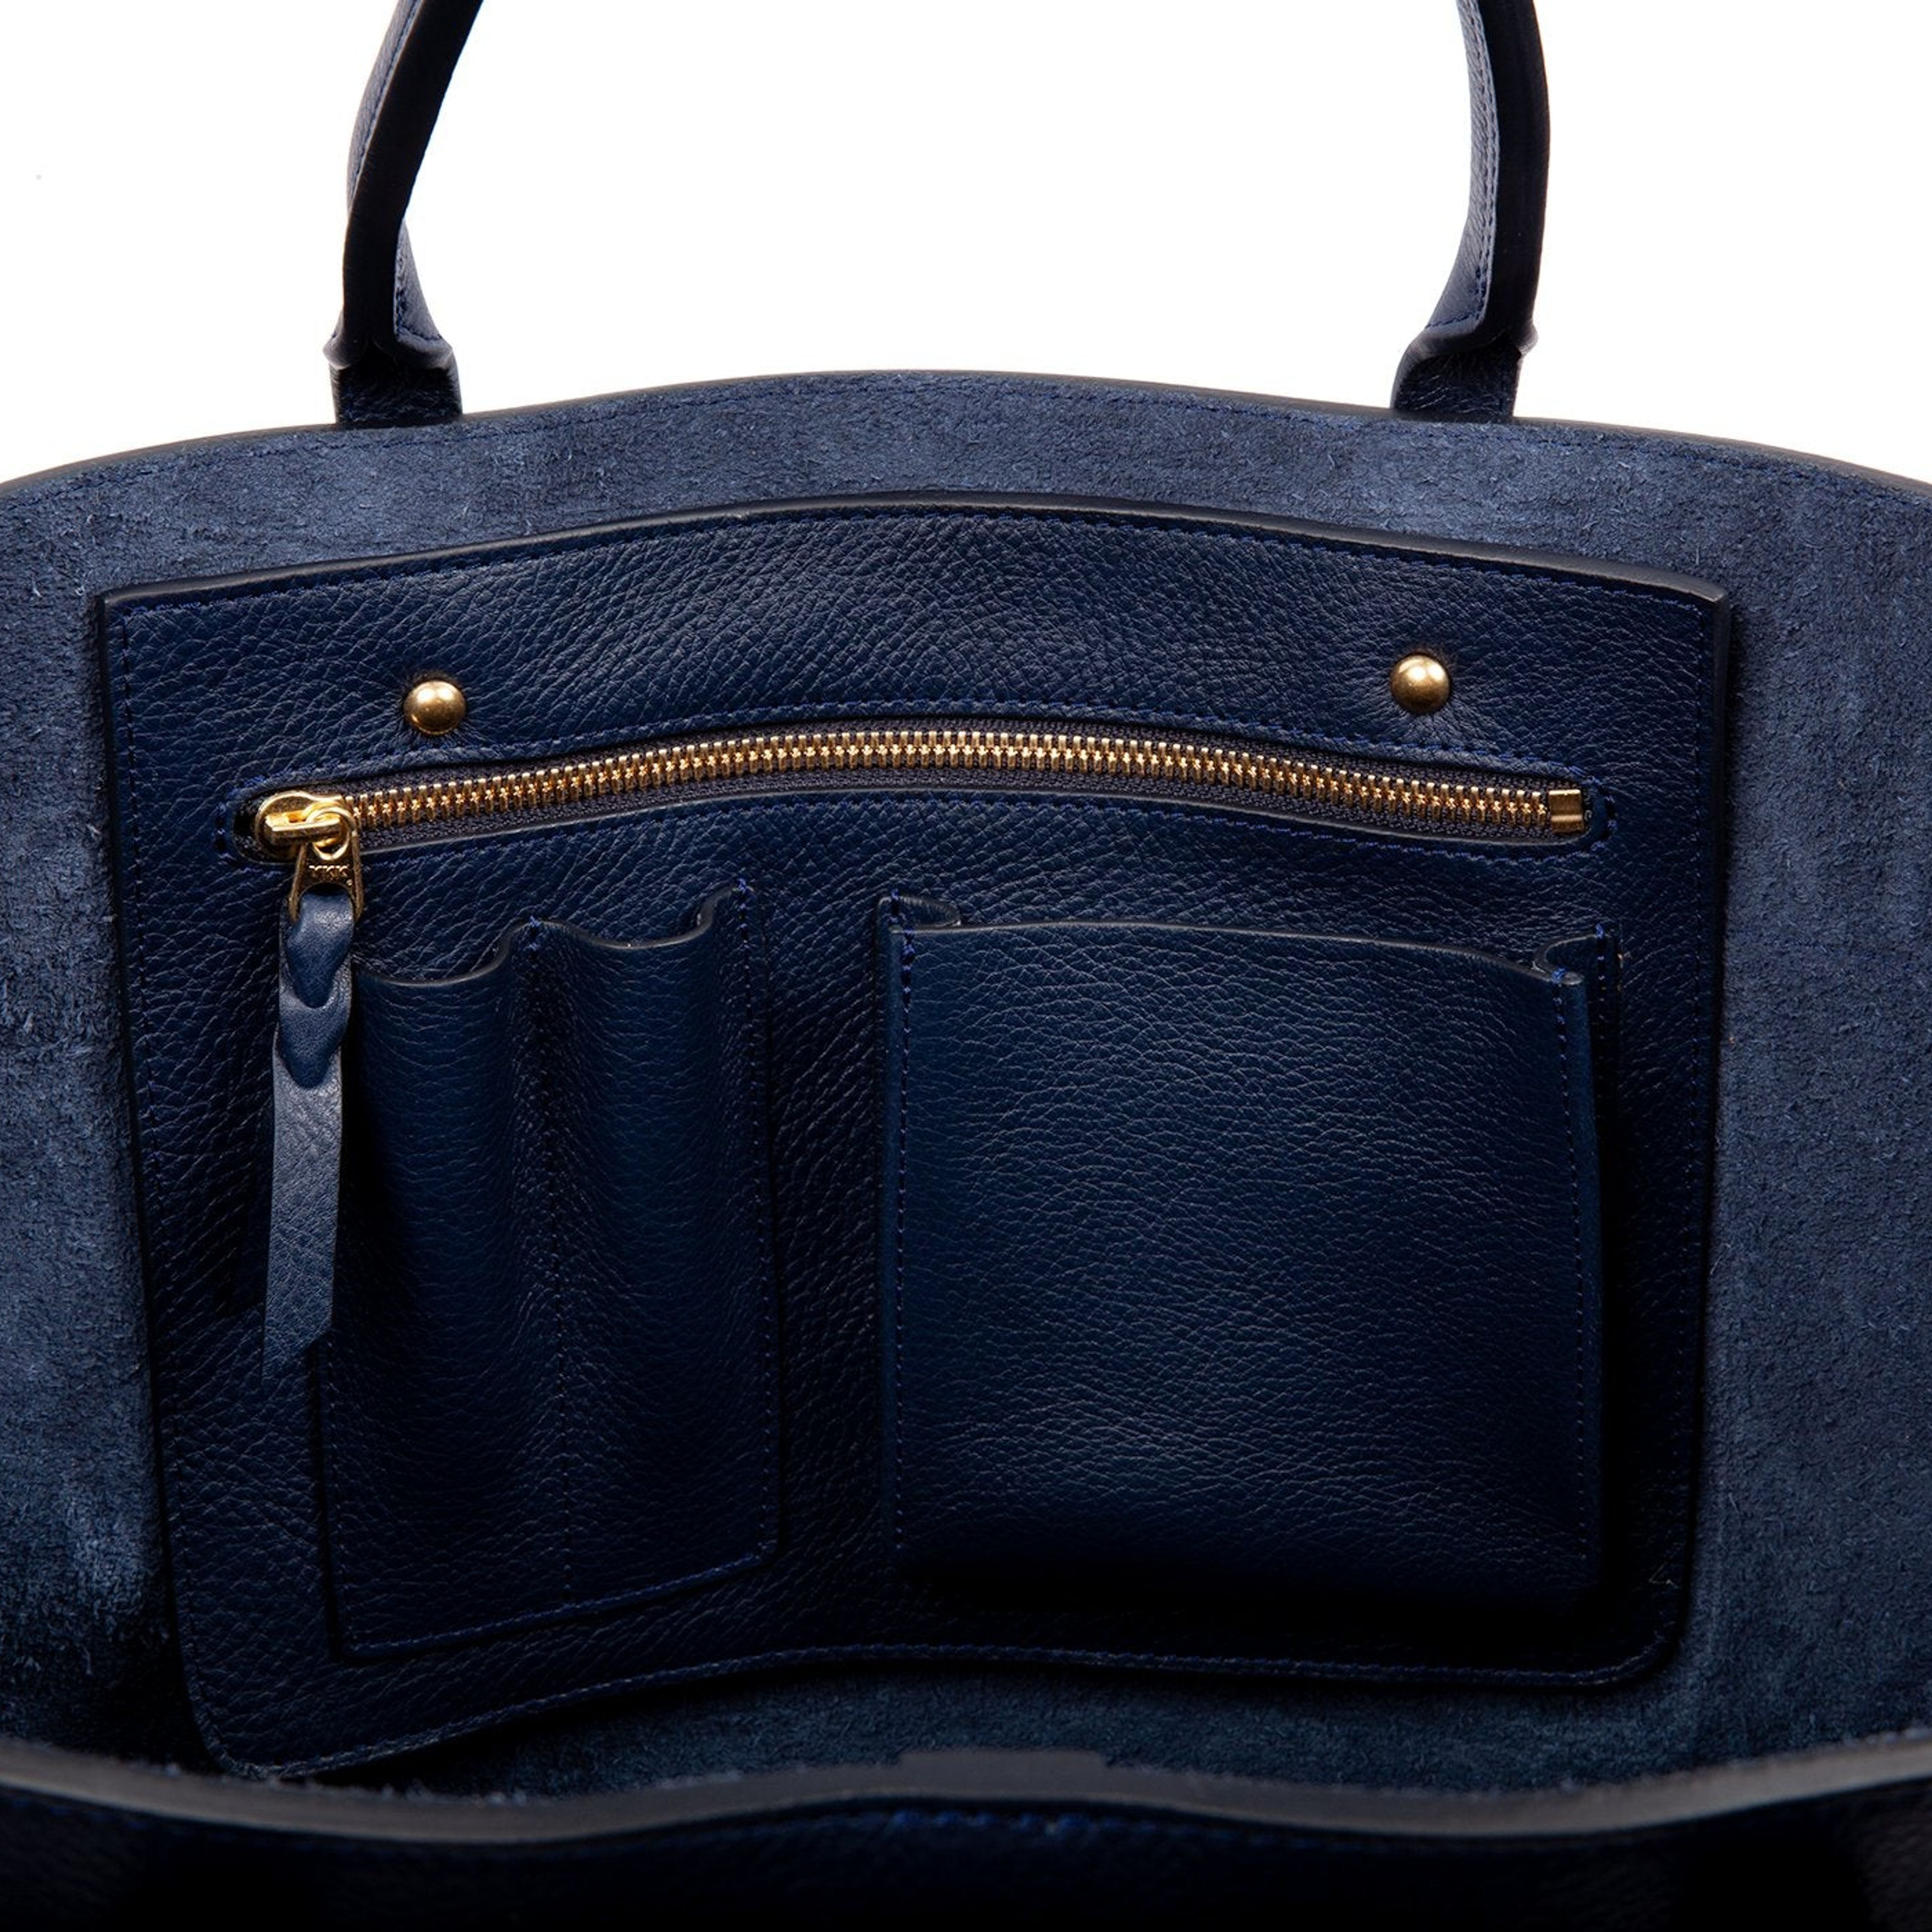 The 929 Tote